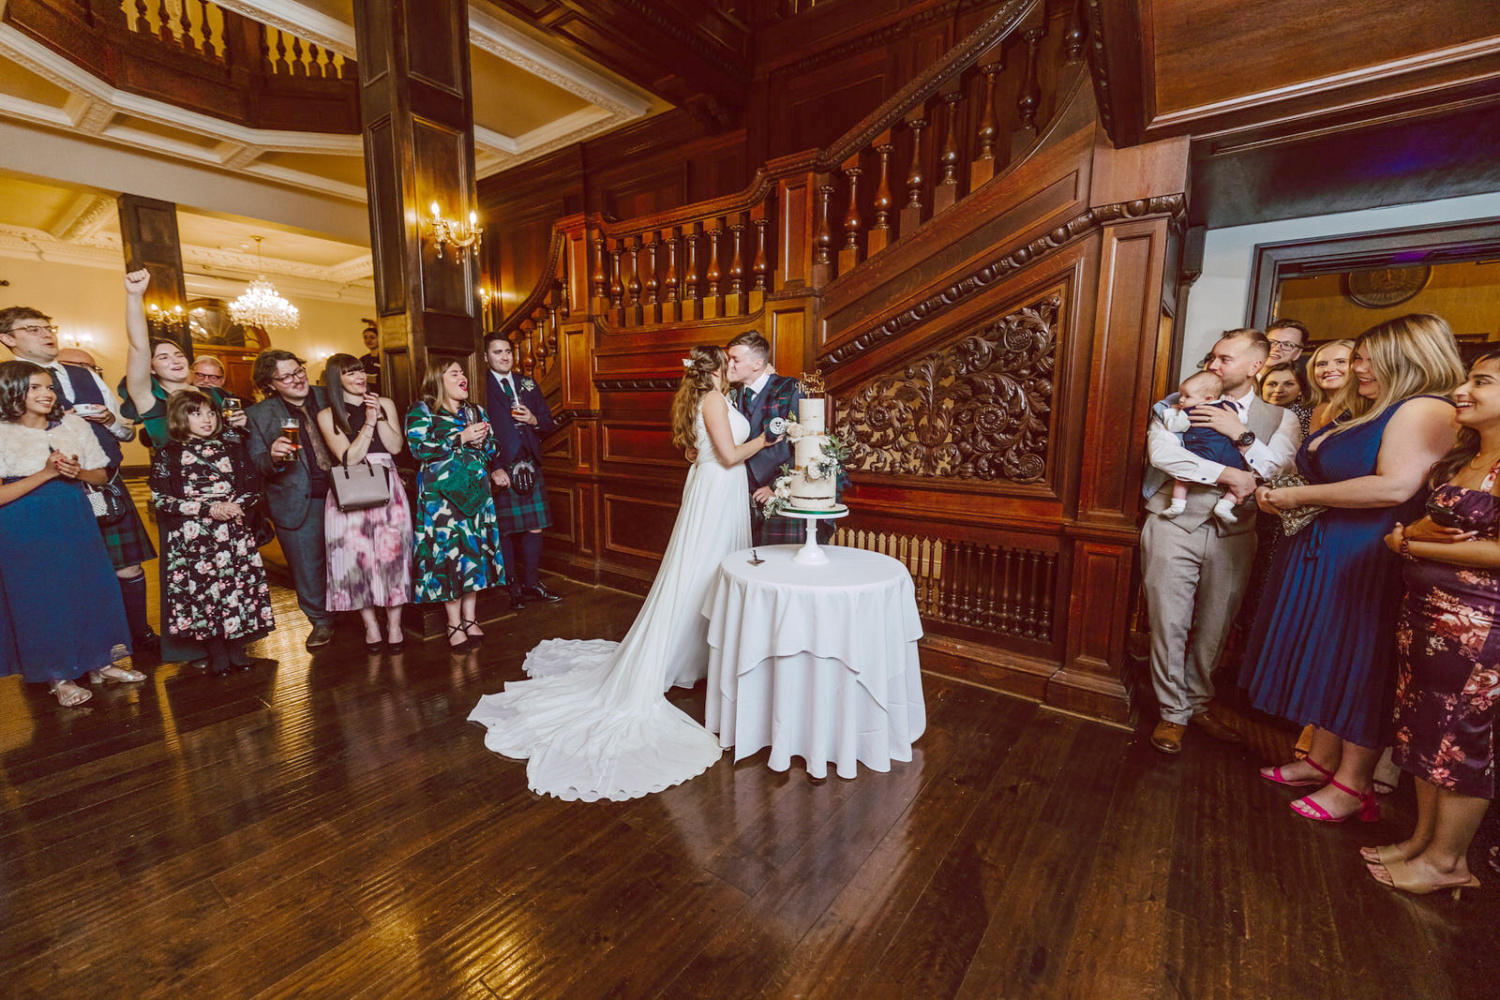 A bride and groom cutting their wedding cake in an ornate room in Bourton Hall